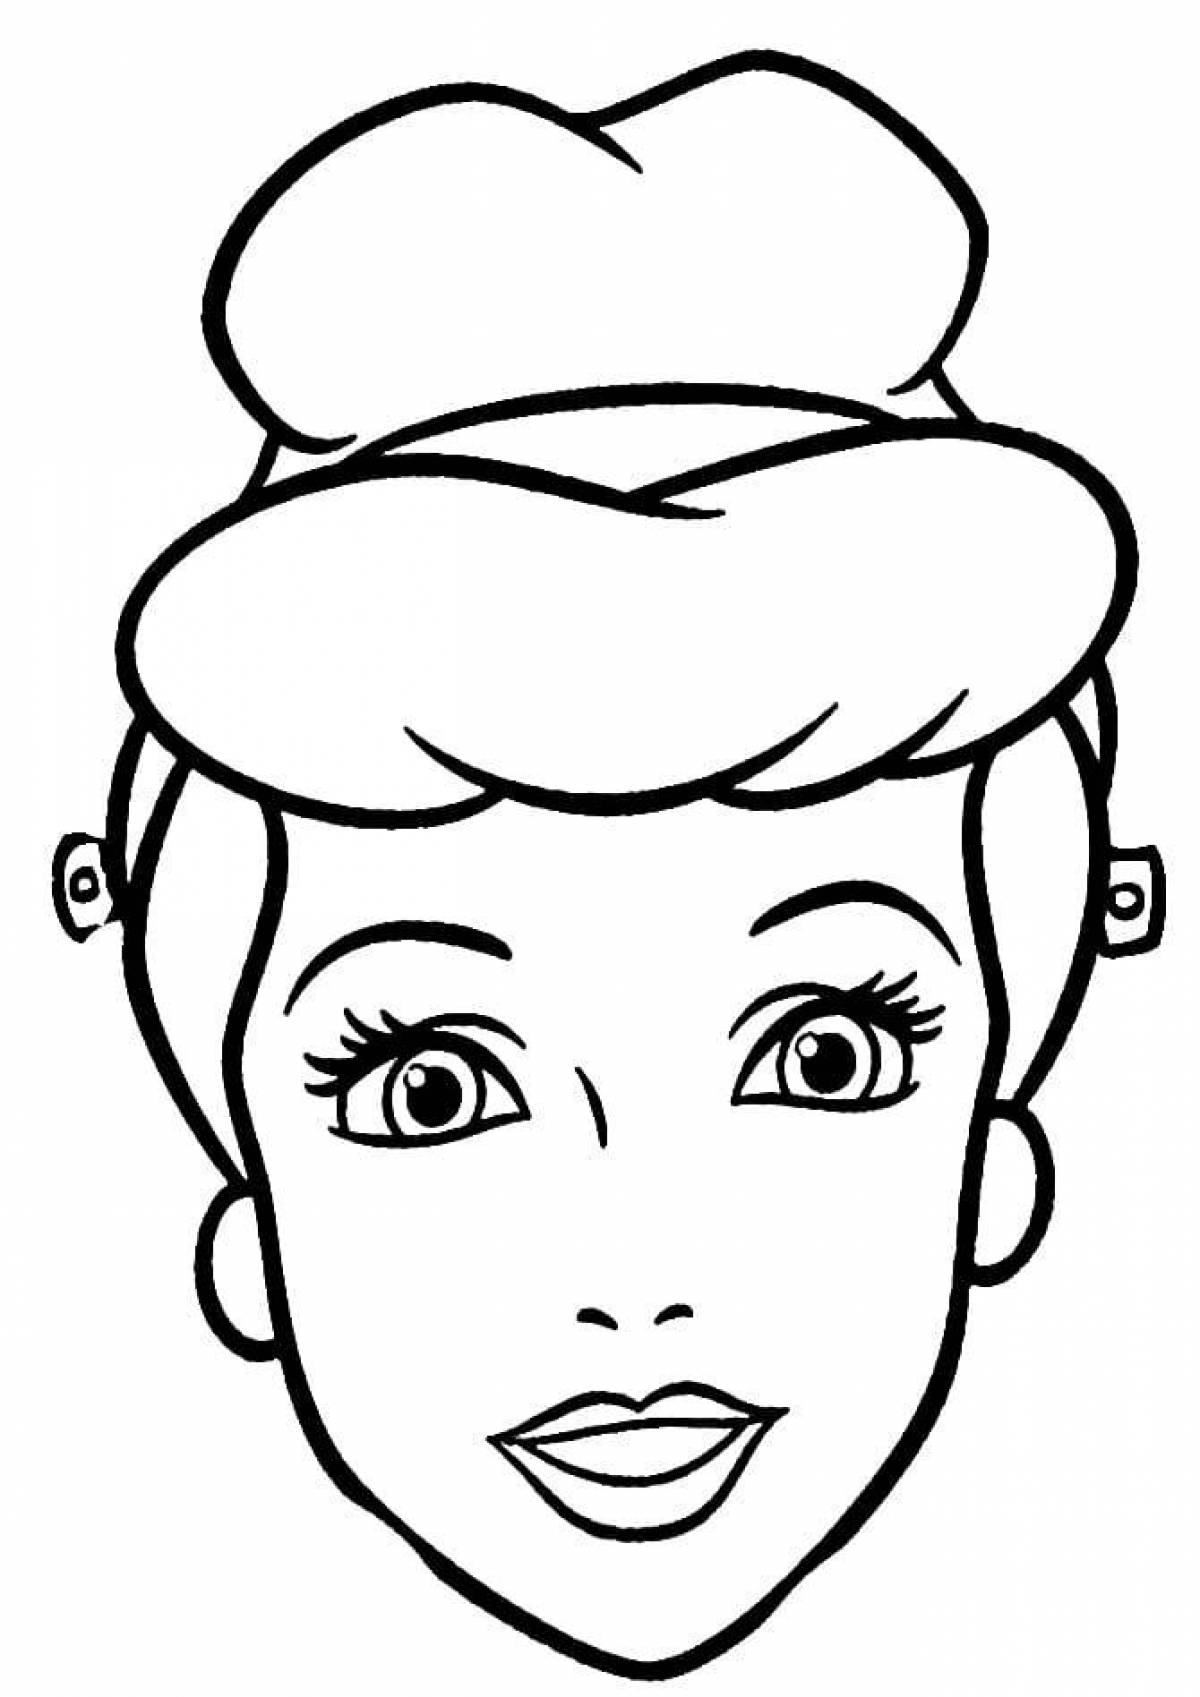 Relaxing human face coloring page